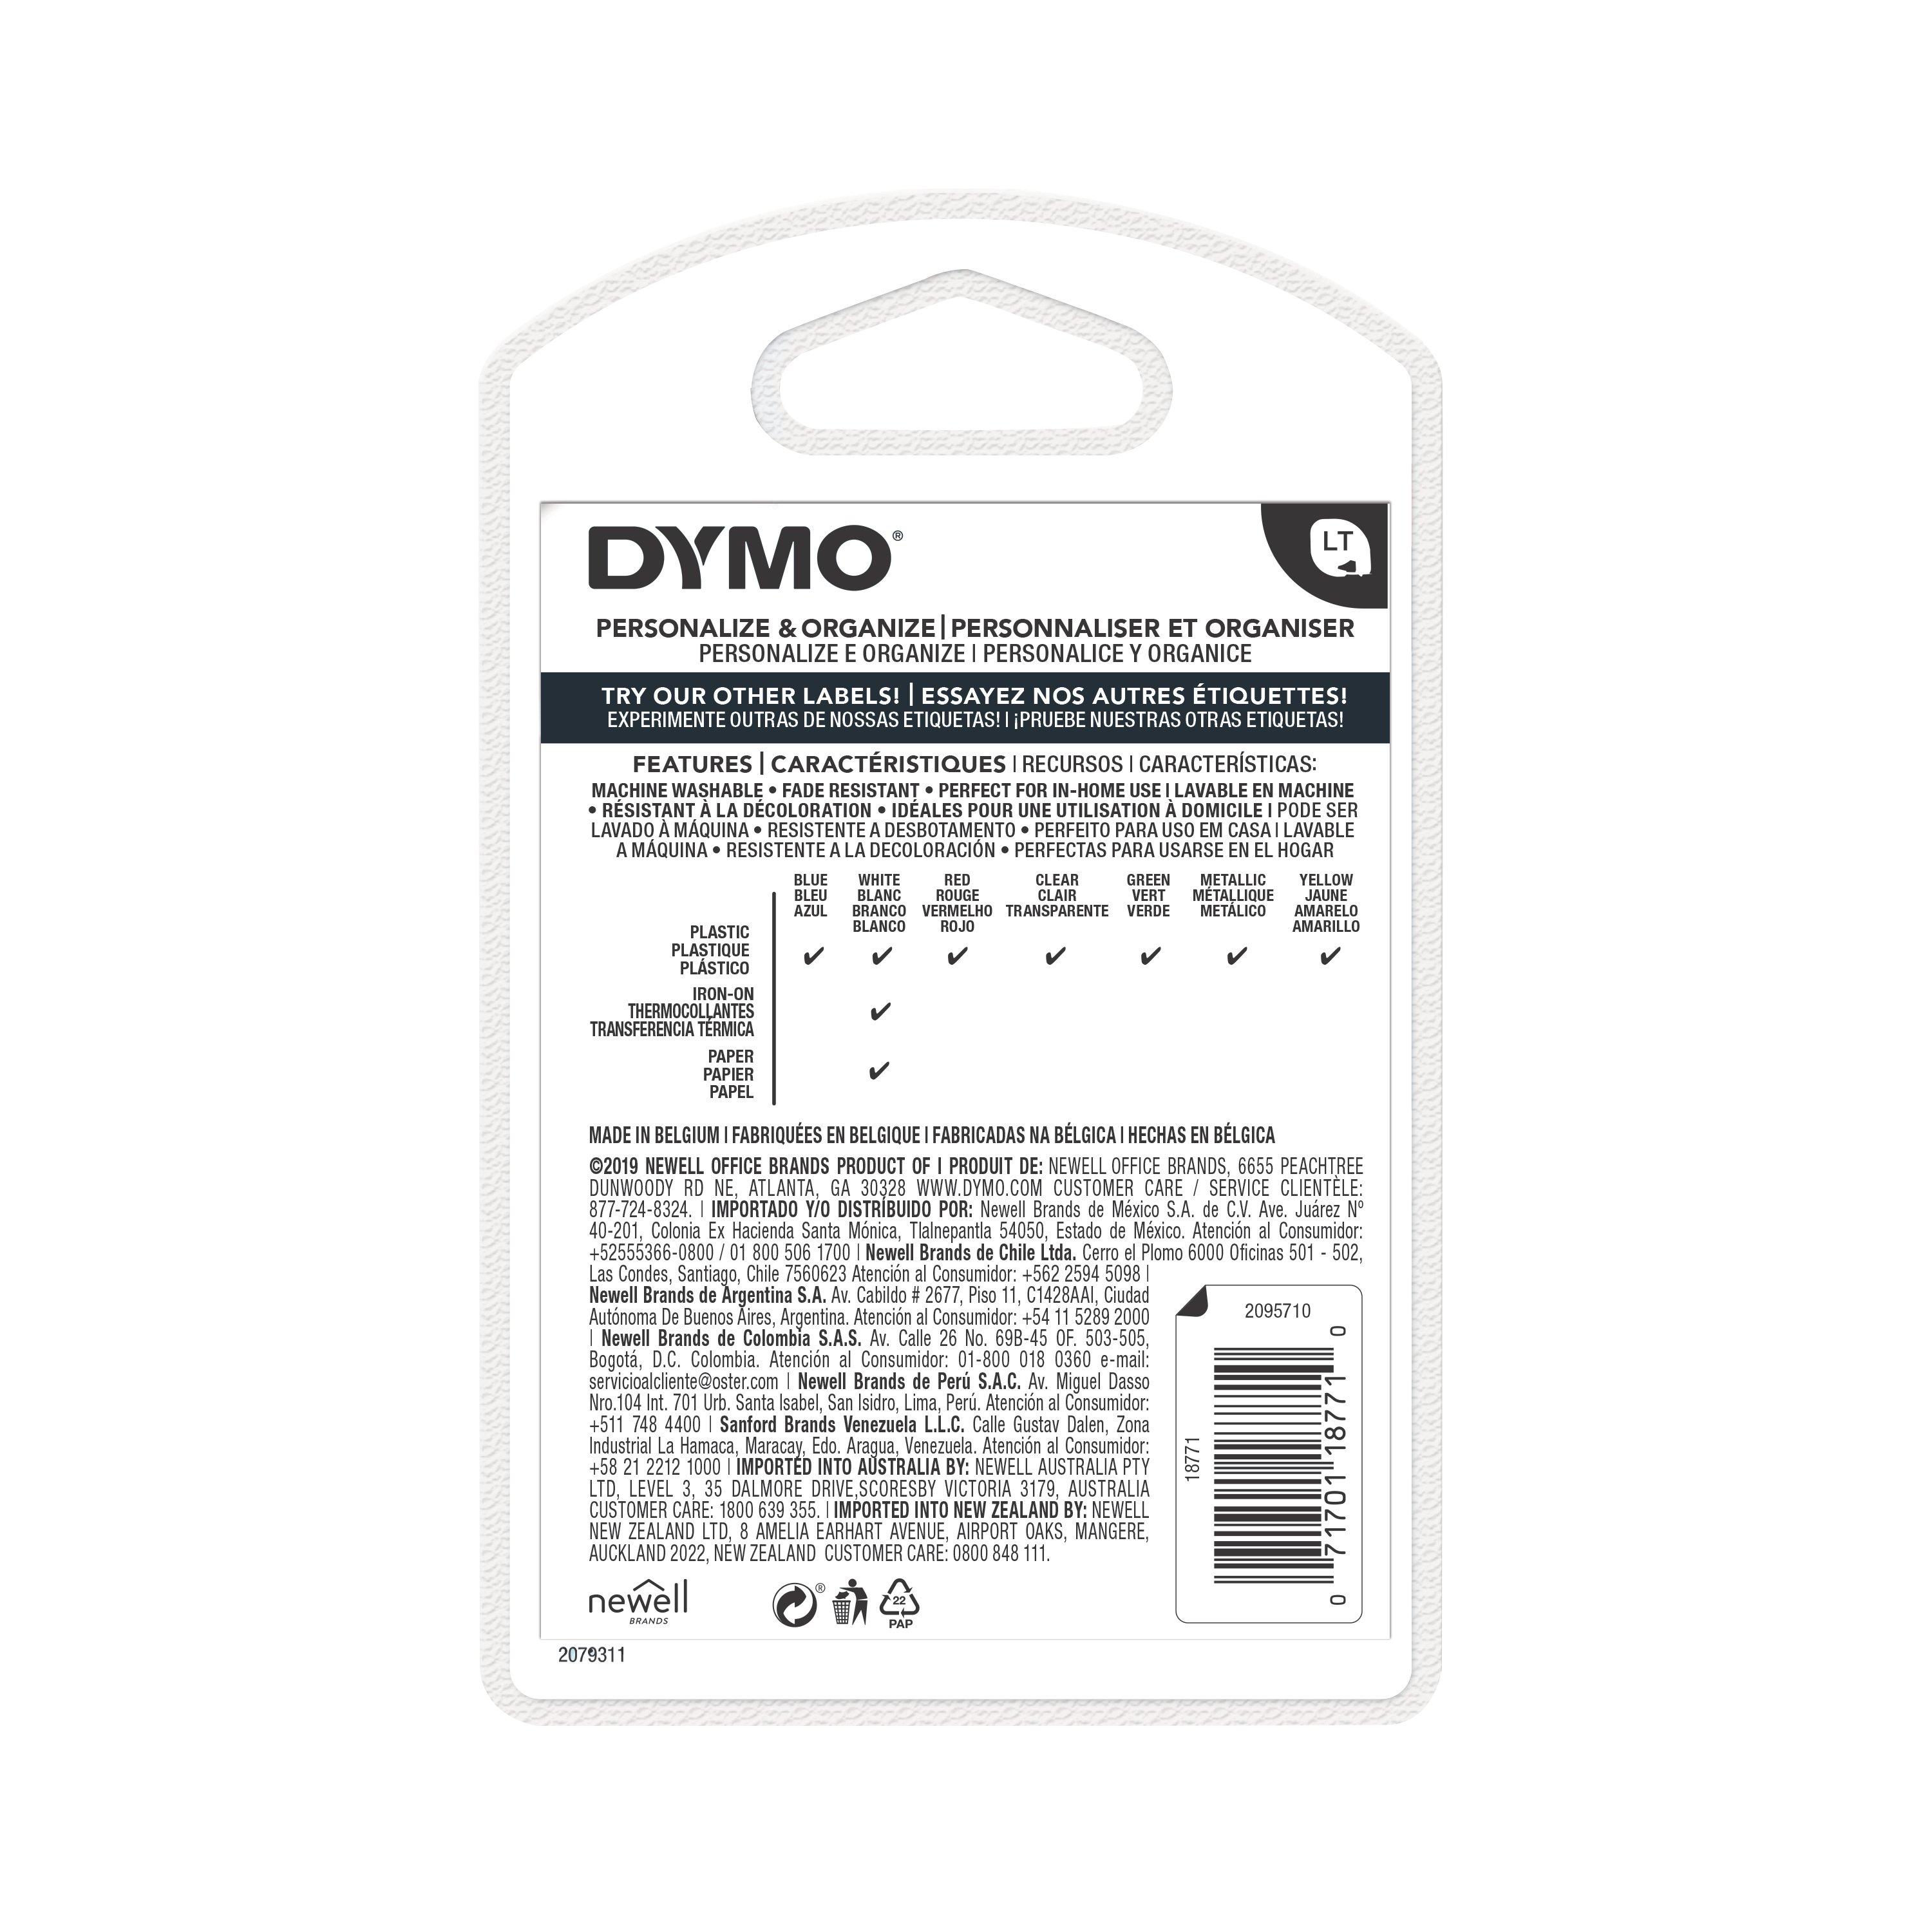 Minimize lost clothes with Dymo LetraTag iron-on labels